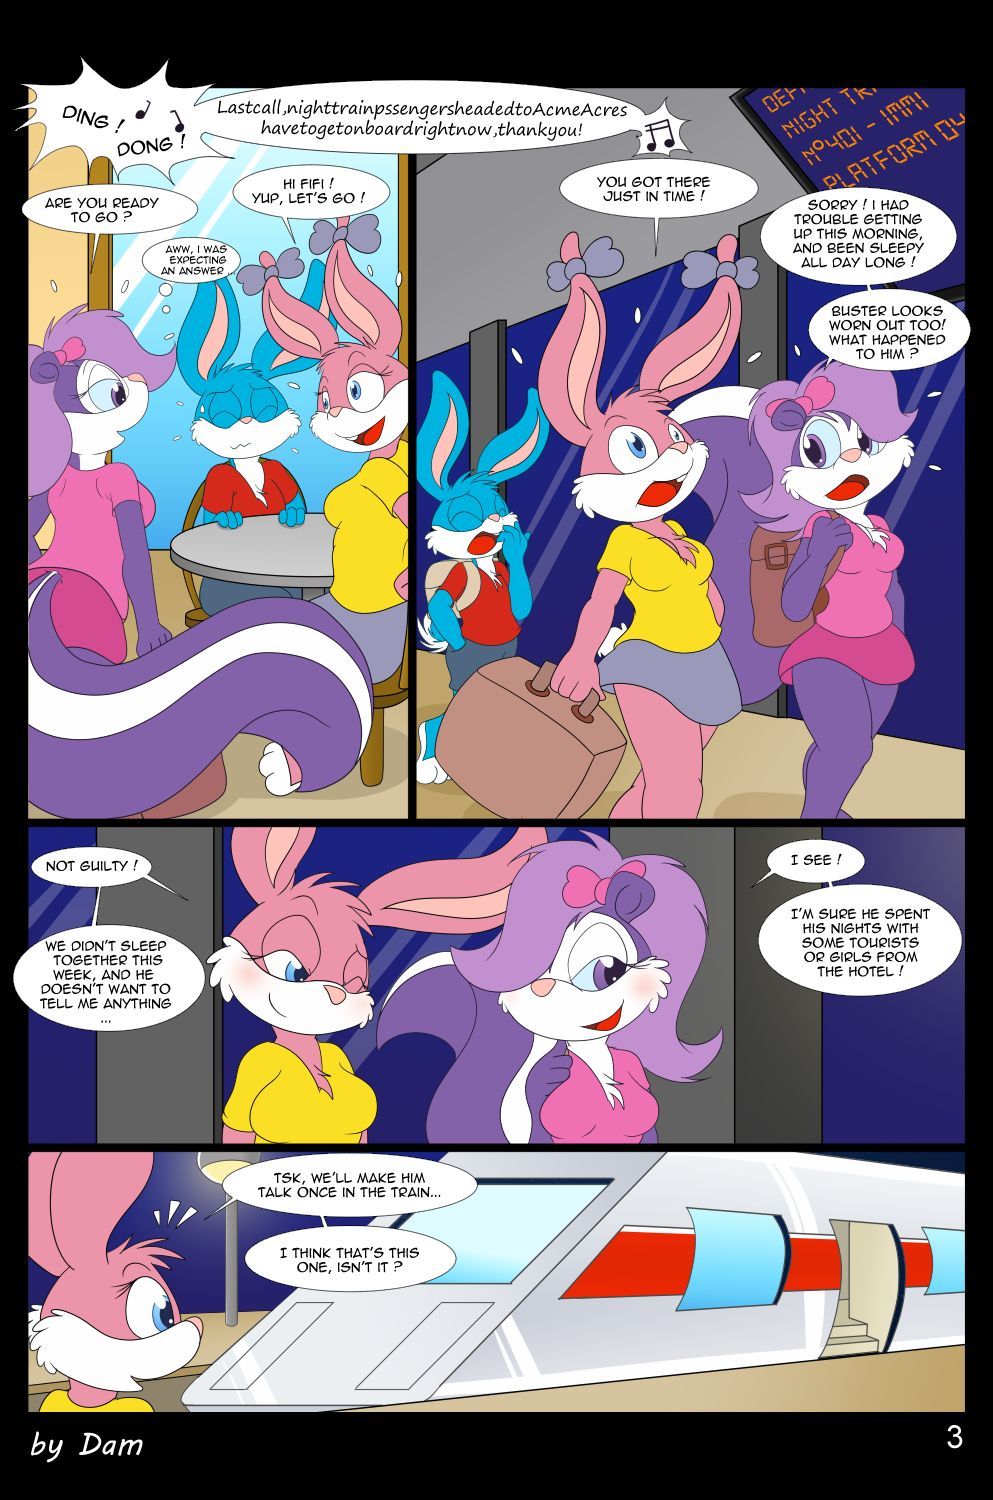 [Dam] Toons on a train [Ongoing] 3